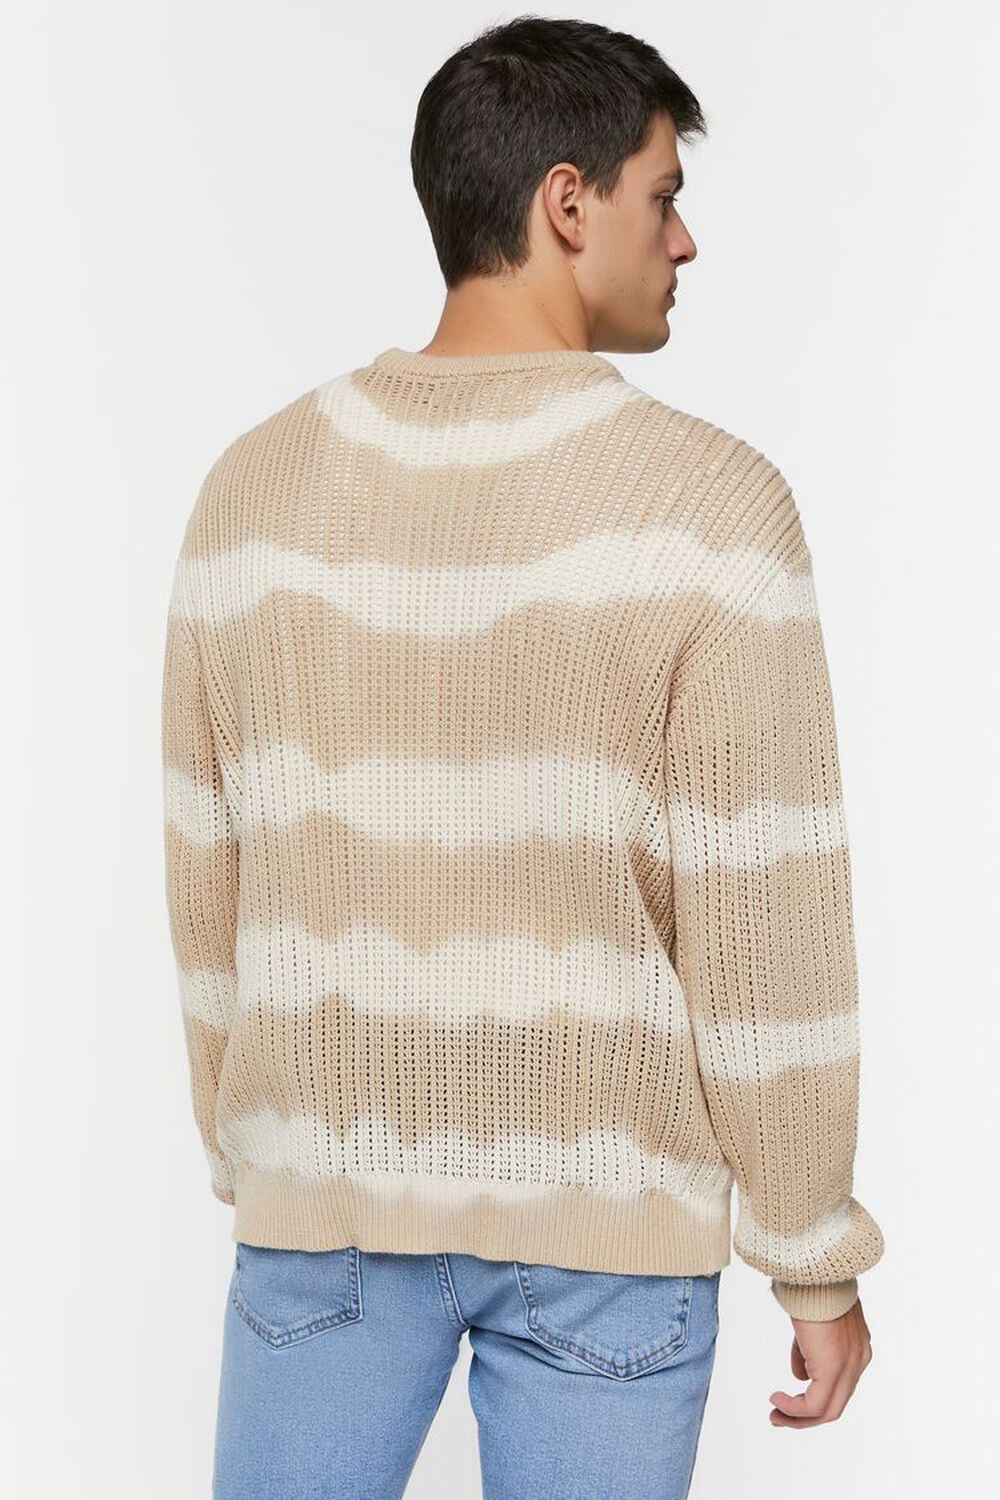 TAUPE/CREAM Tie-Dye Striped Sweater, image 3